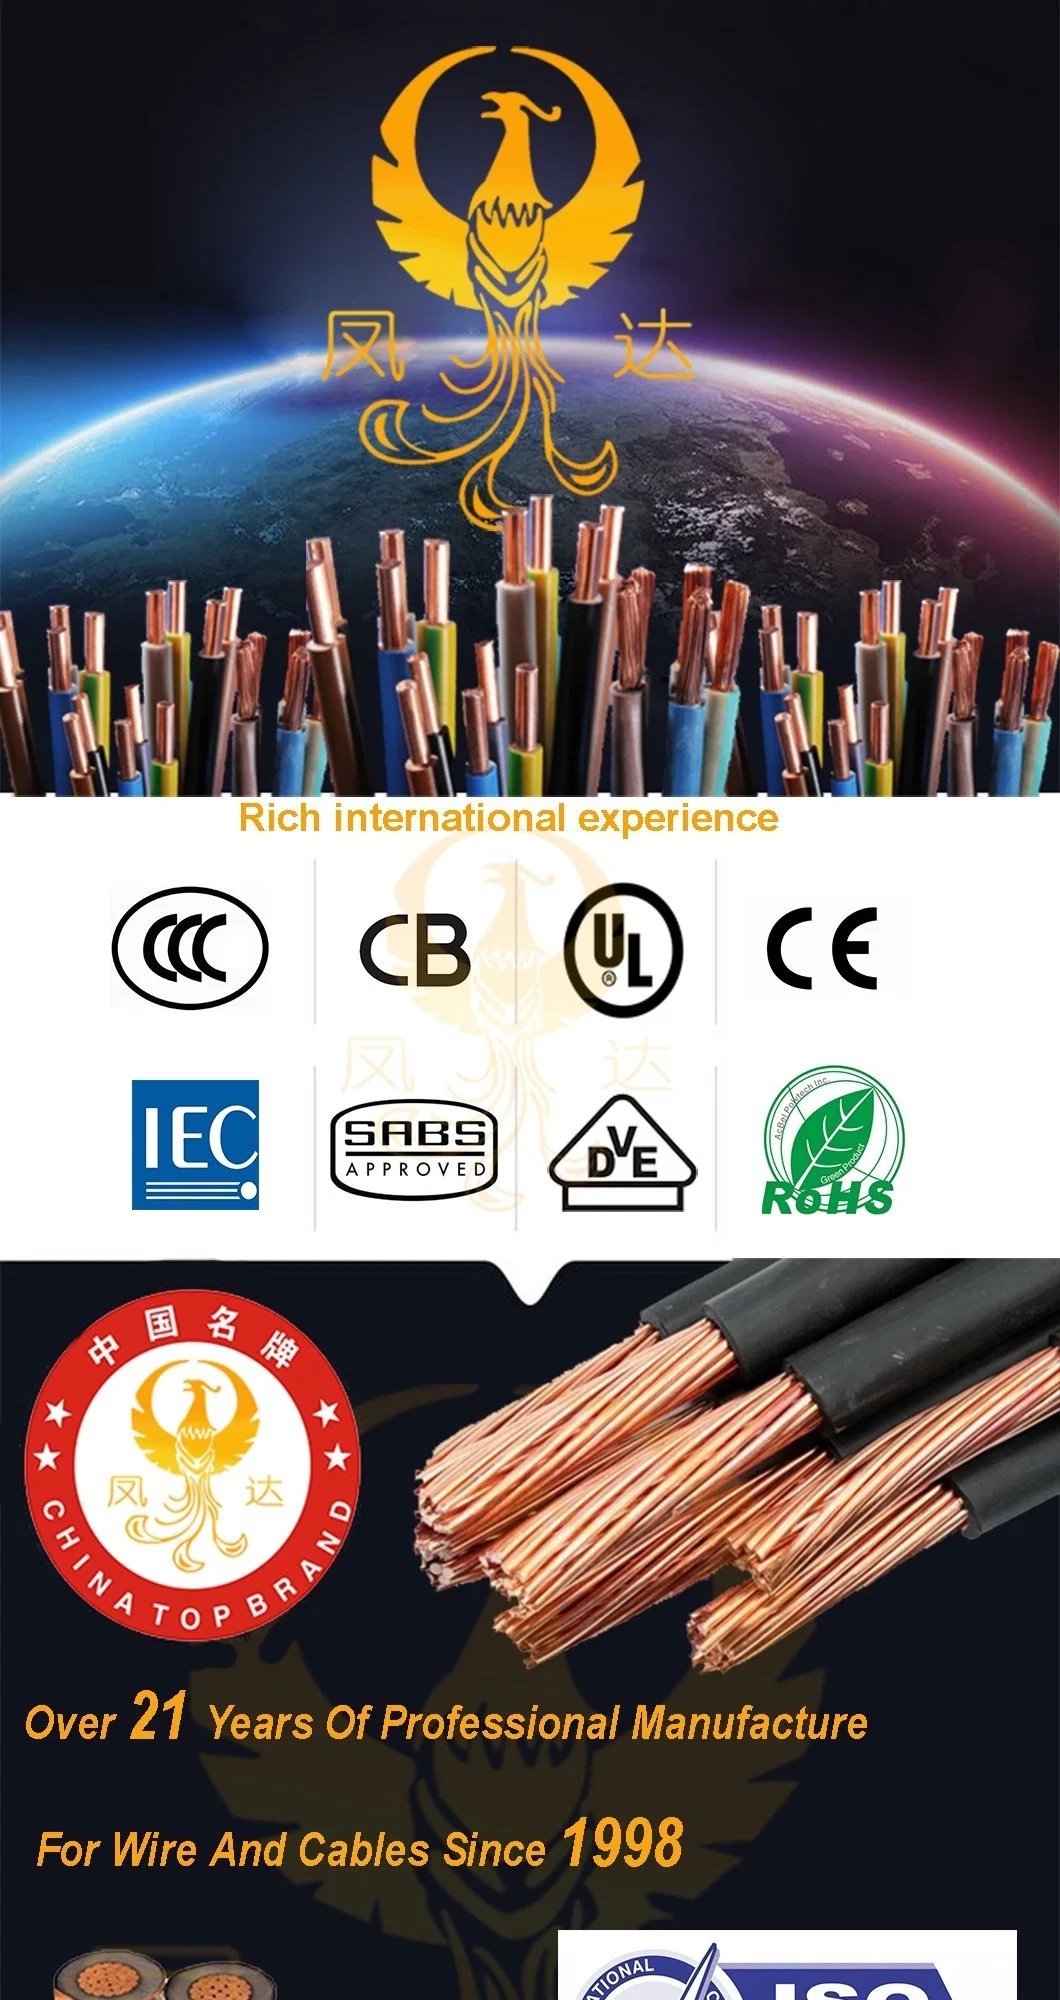 450/750V PVC Insulated Electric Wire BV/BVV/RV/Rvv/Rvs Cable 3mm 10mm 5.5mm Electrical Wires